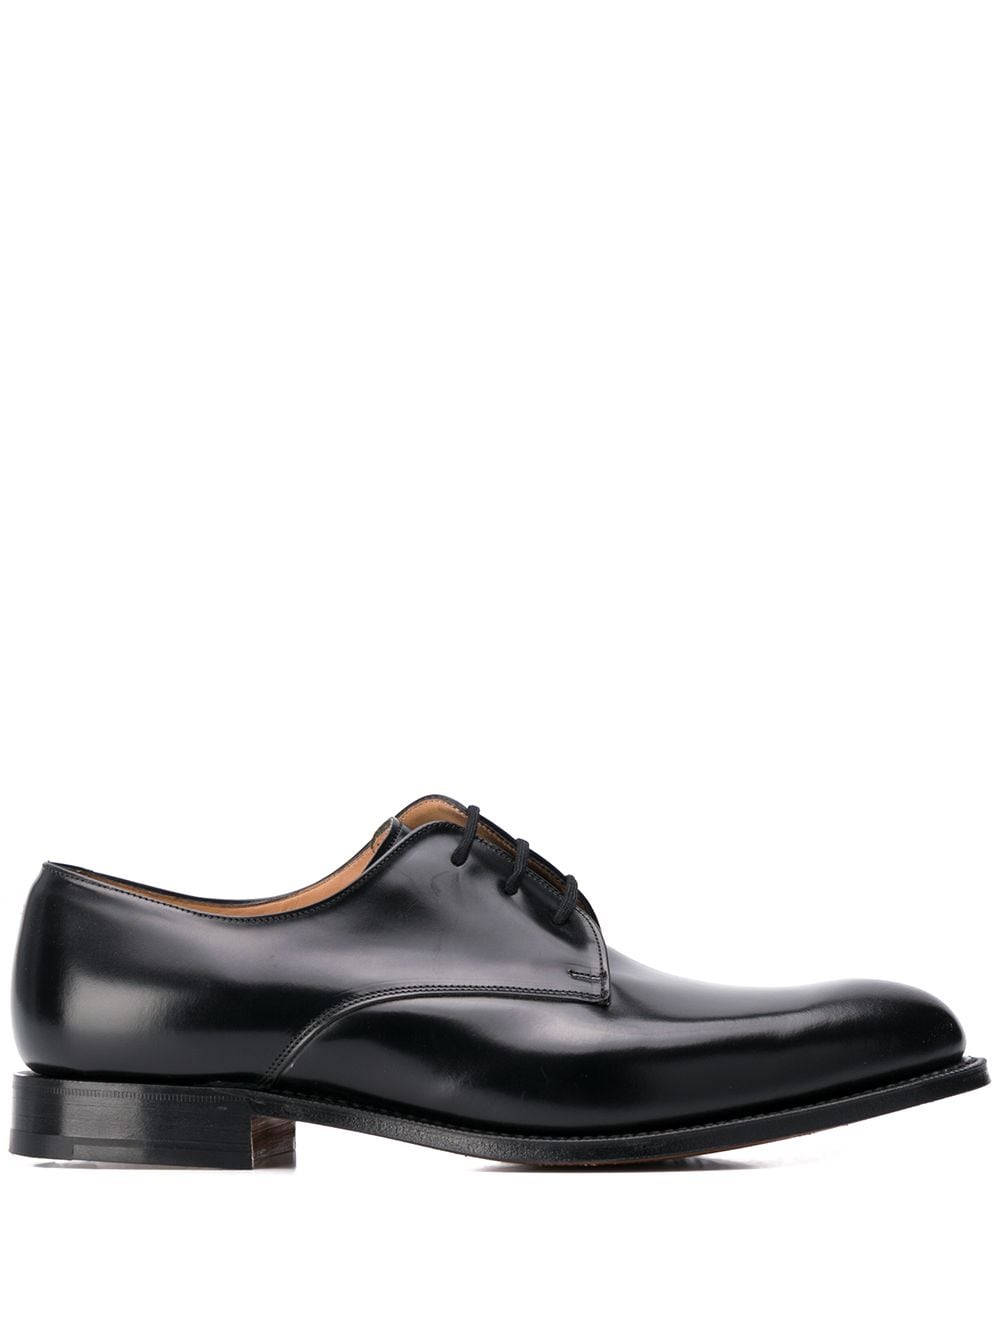 Image 1 of Church's Oslo Derby shoes